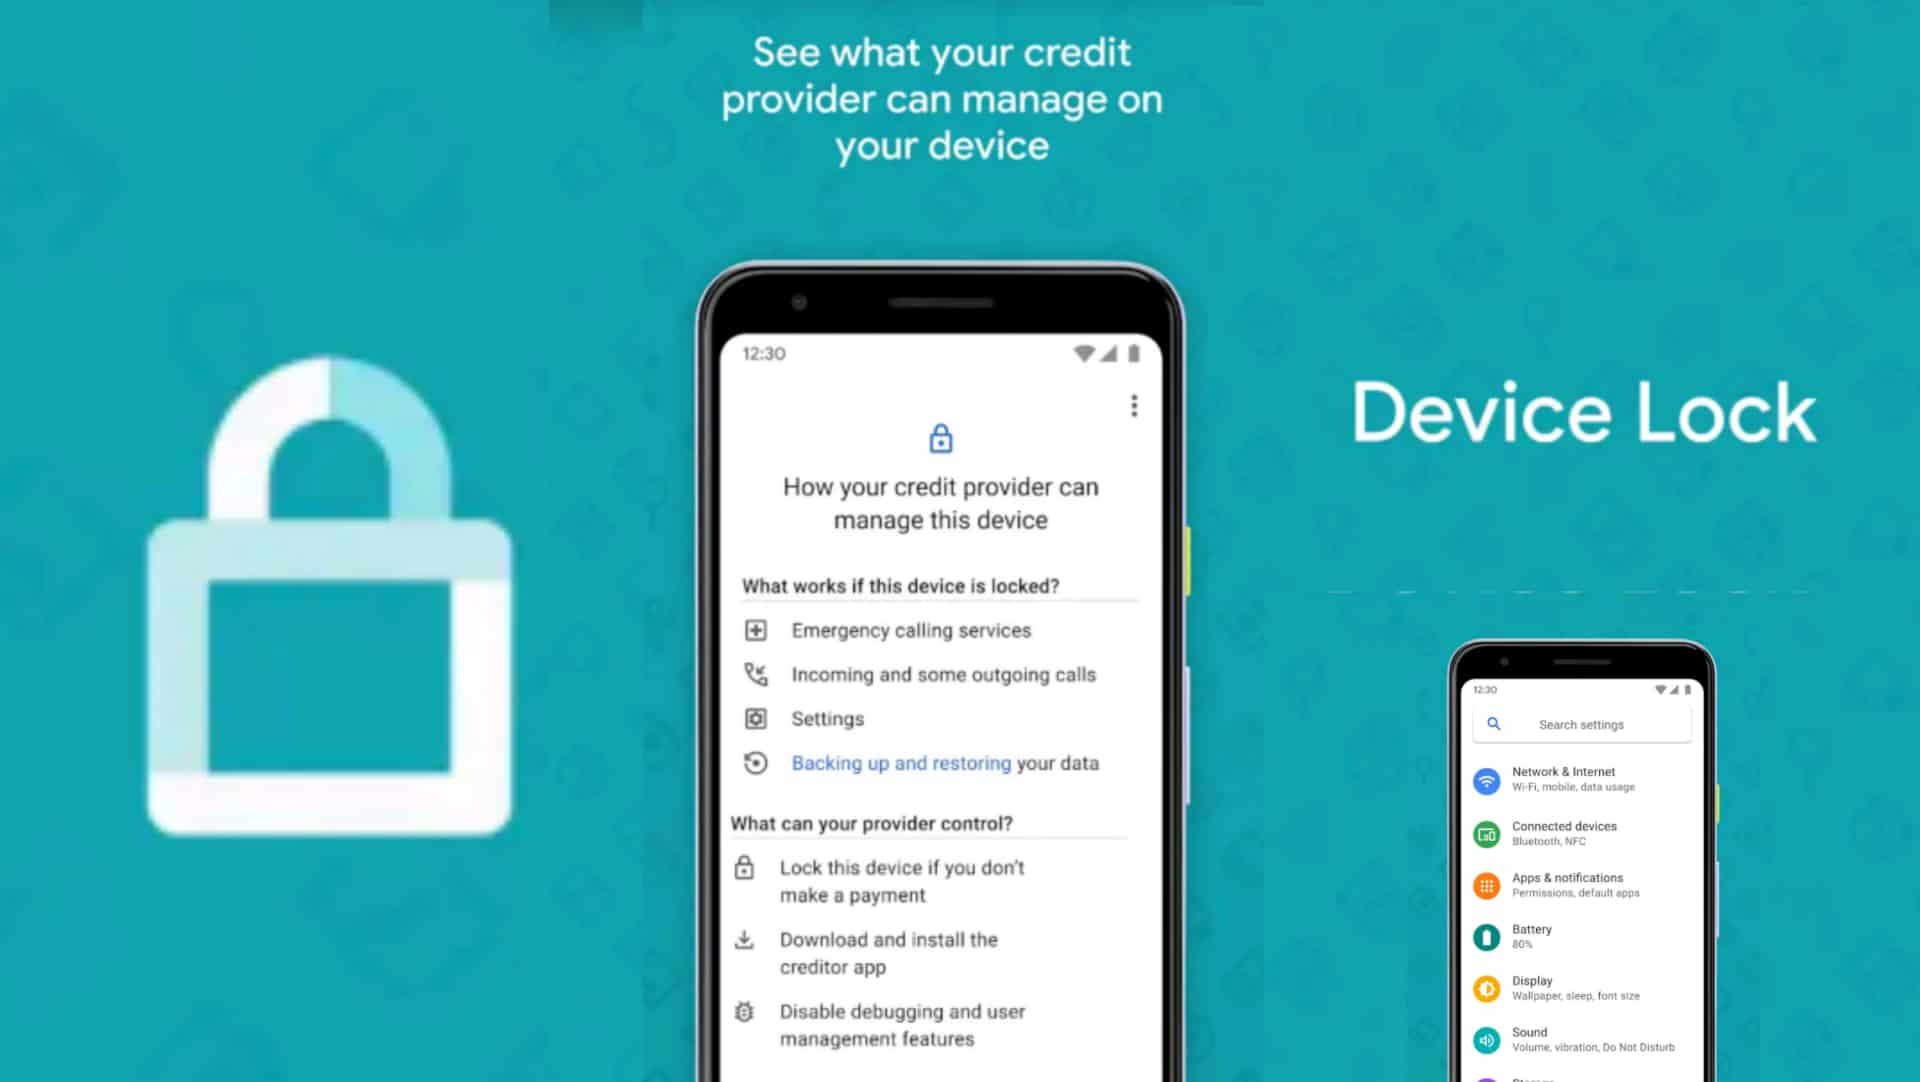 Device Lock Controller: A New Google App That Lets Creditors Manage Financed Phones